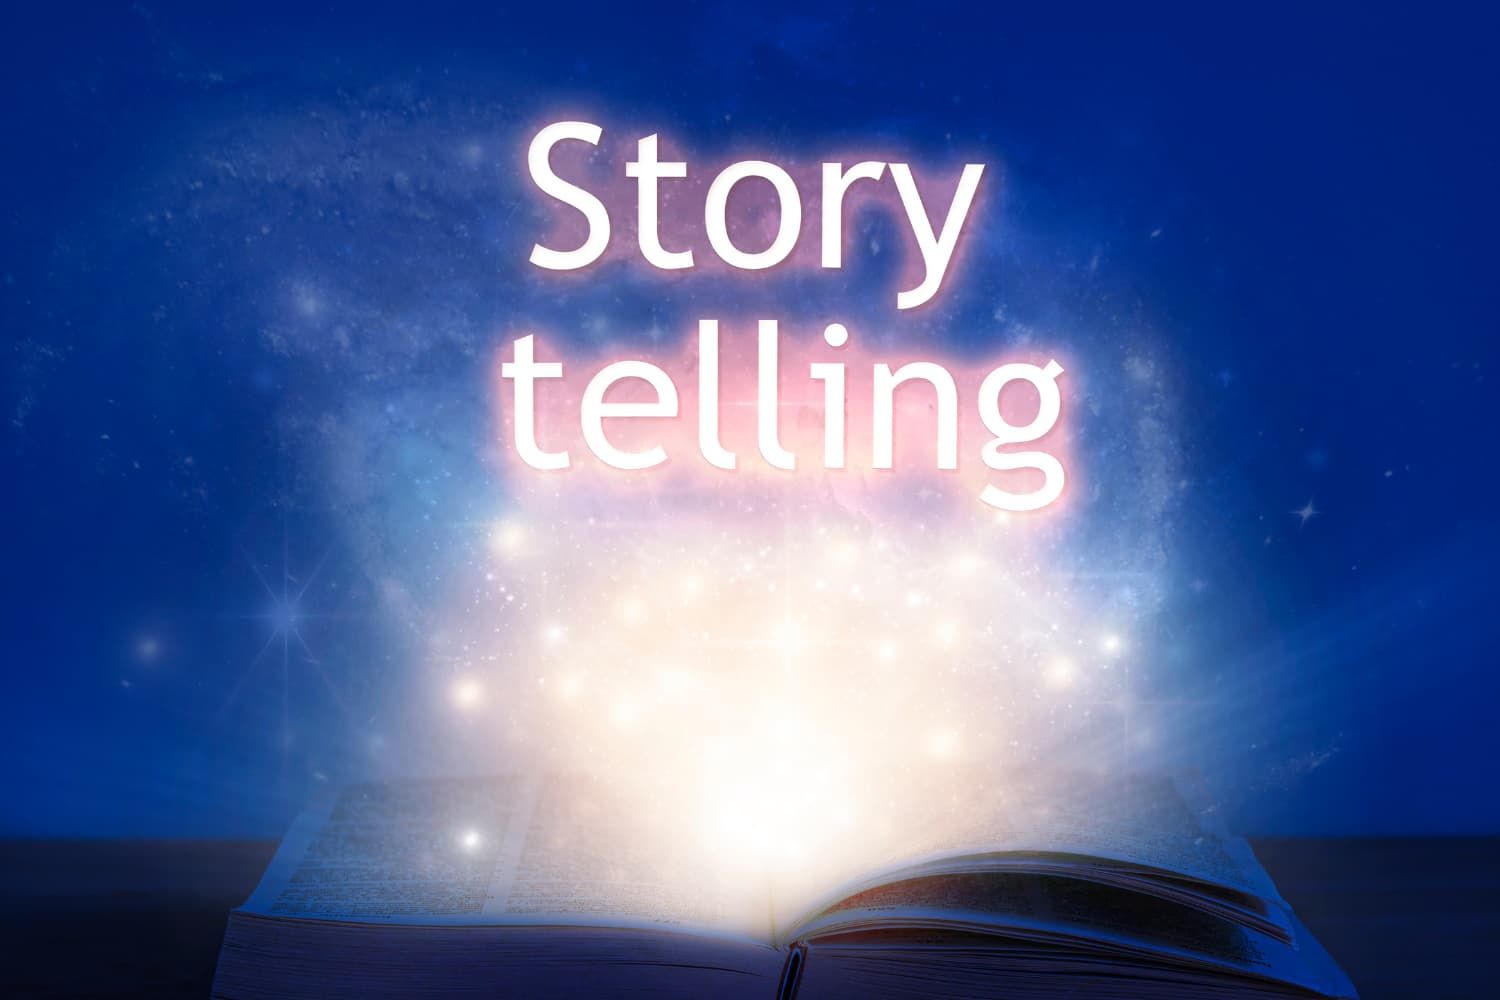 Storytelling%20tips%20-%20OT%20Psalm%2024%20-%20Five%20tips%20to%20help%20teach%20on%20Psalm%2024-c705066d Caring for each other